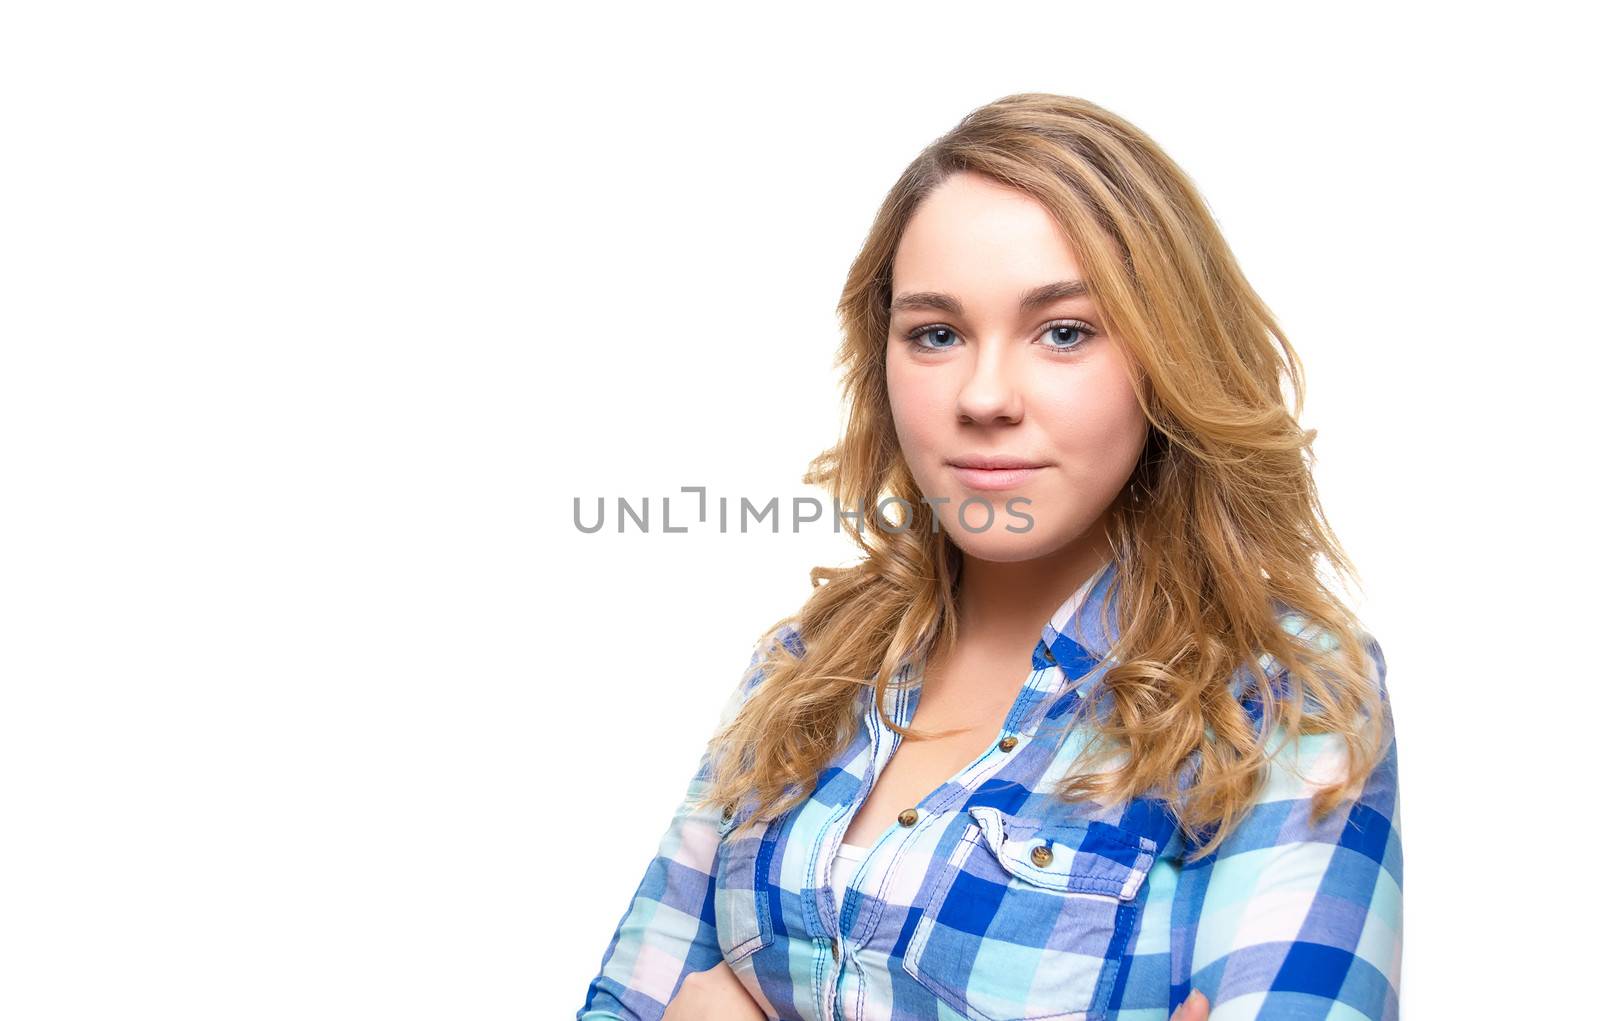 Blonde teenager student with blue plaid shirt by doble.d